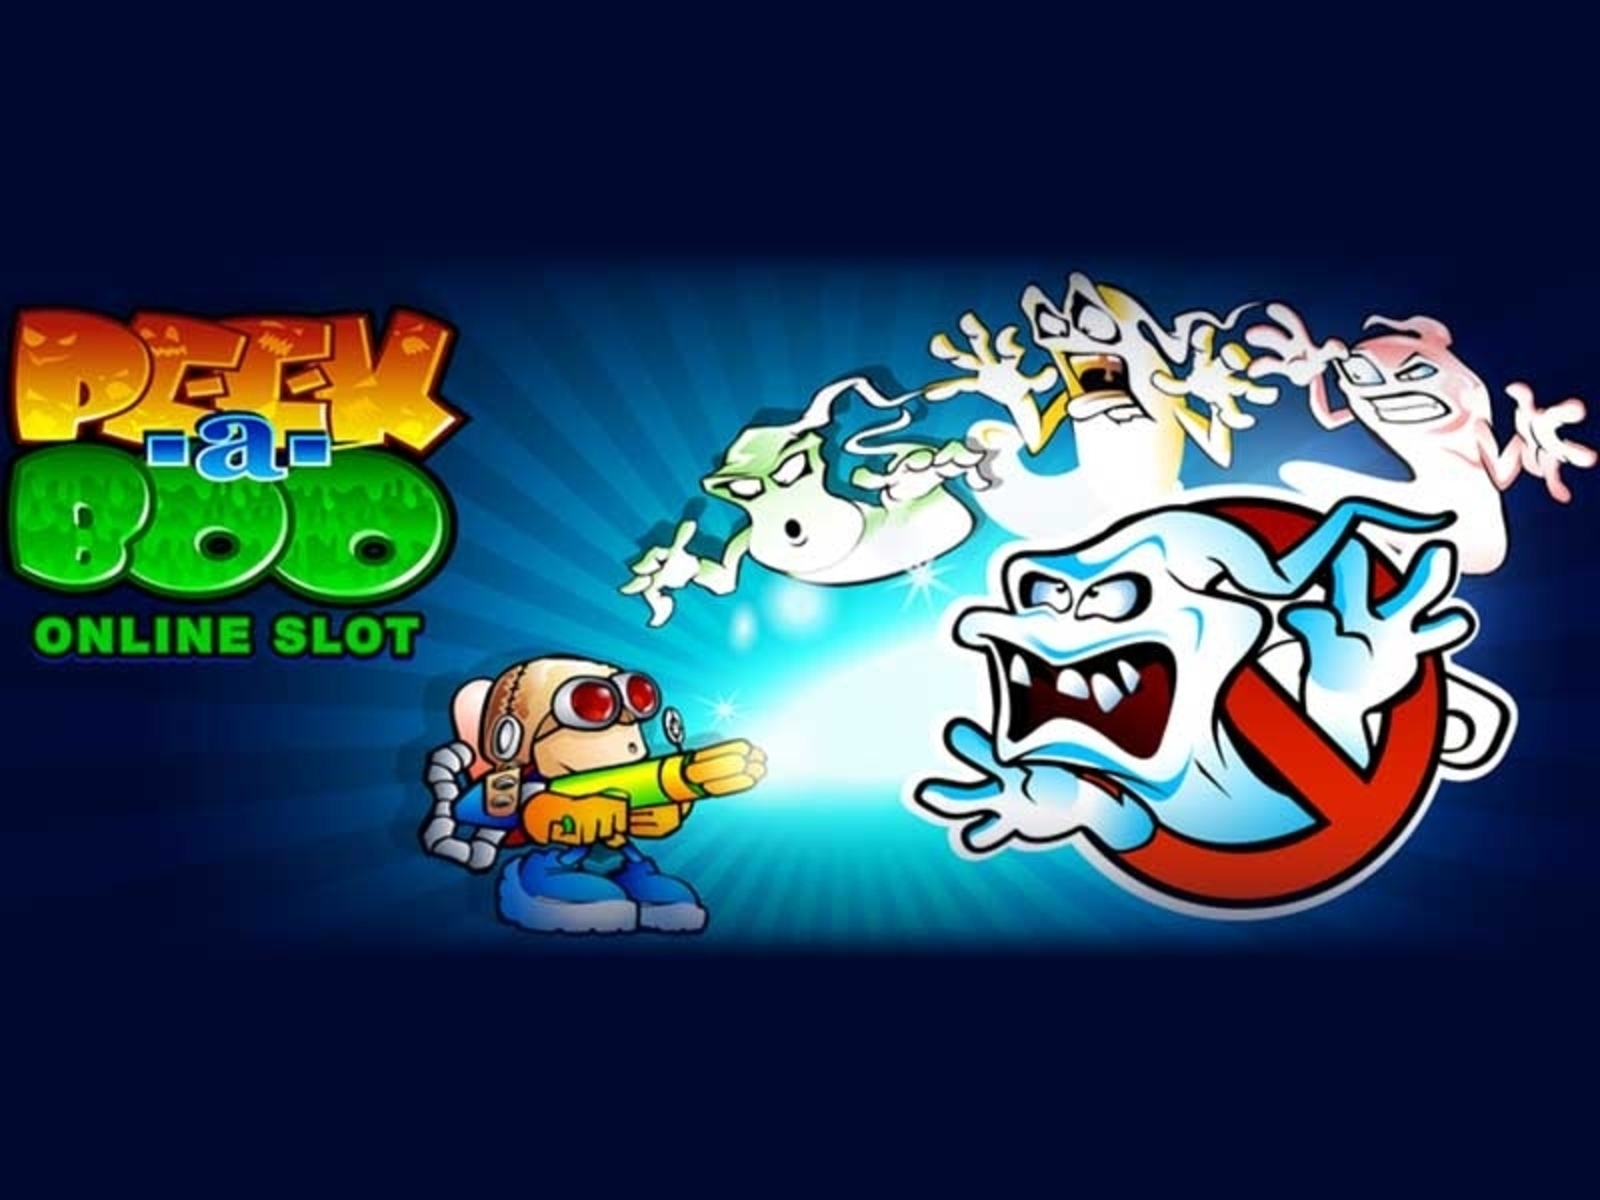 The Peek-a-Boo Online Slot Demo Game by Microgaming